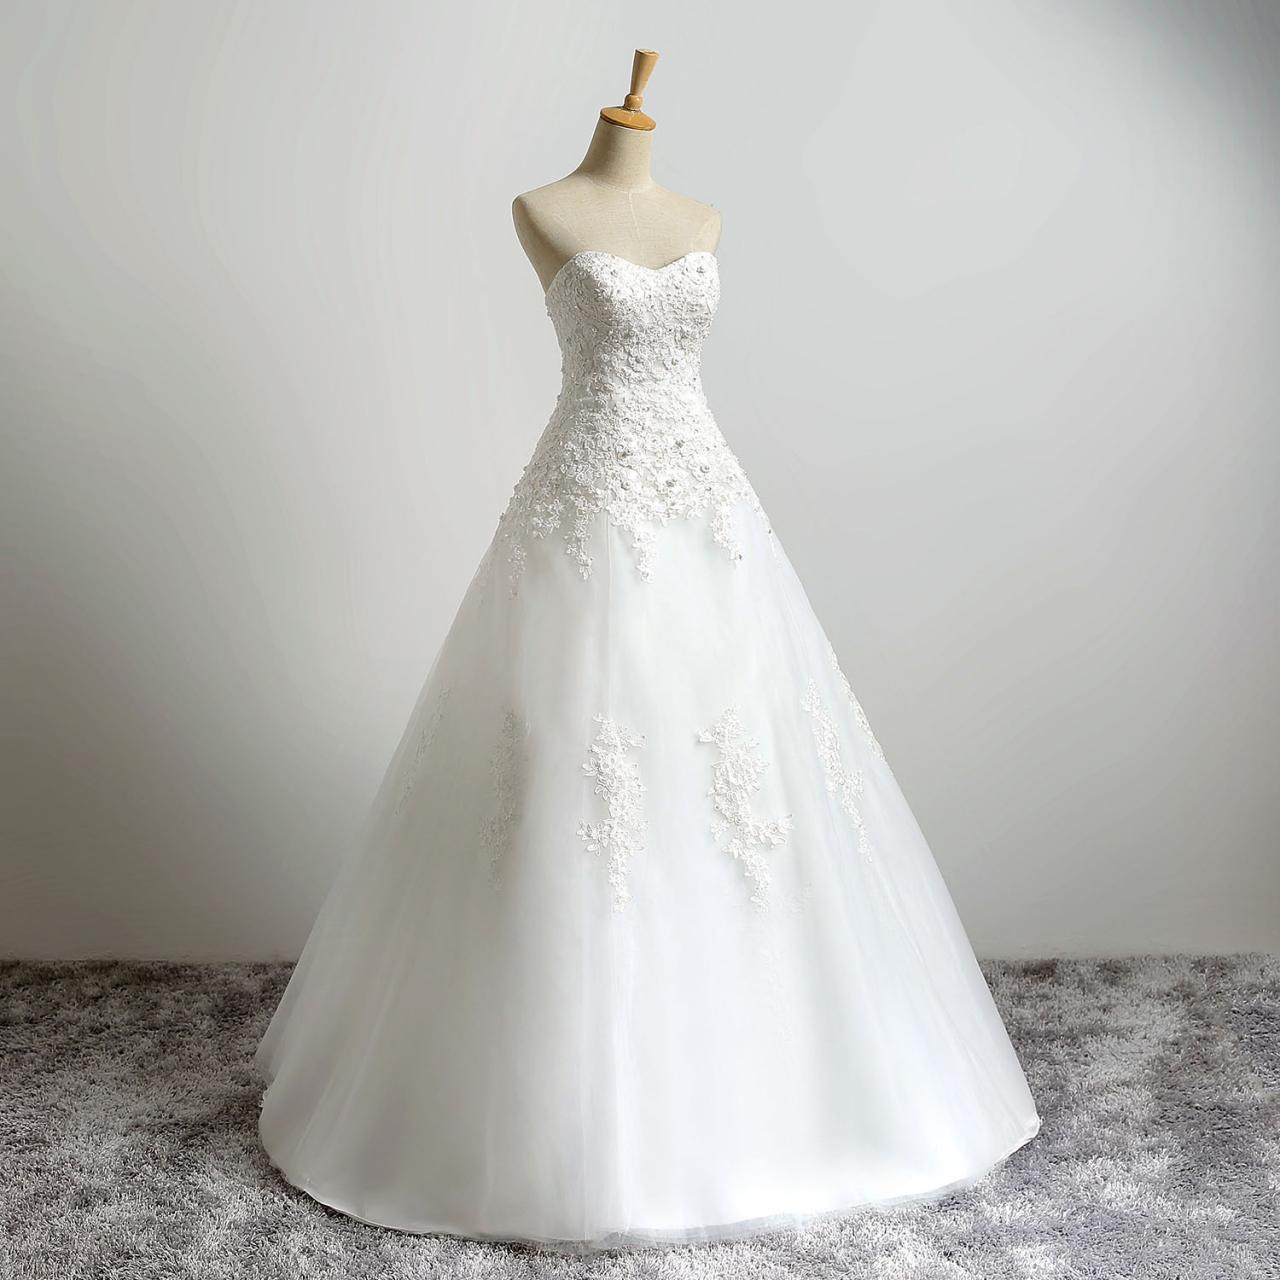 Ivory Lace Appliqués Tulle Wedding Gown Showcases Beaded Floral Lace Bodice And Lace-up Back